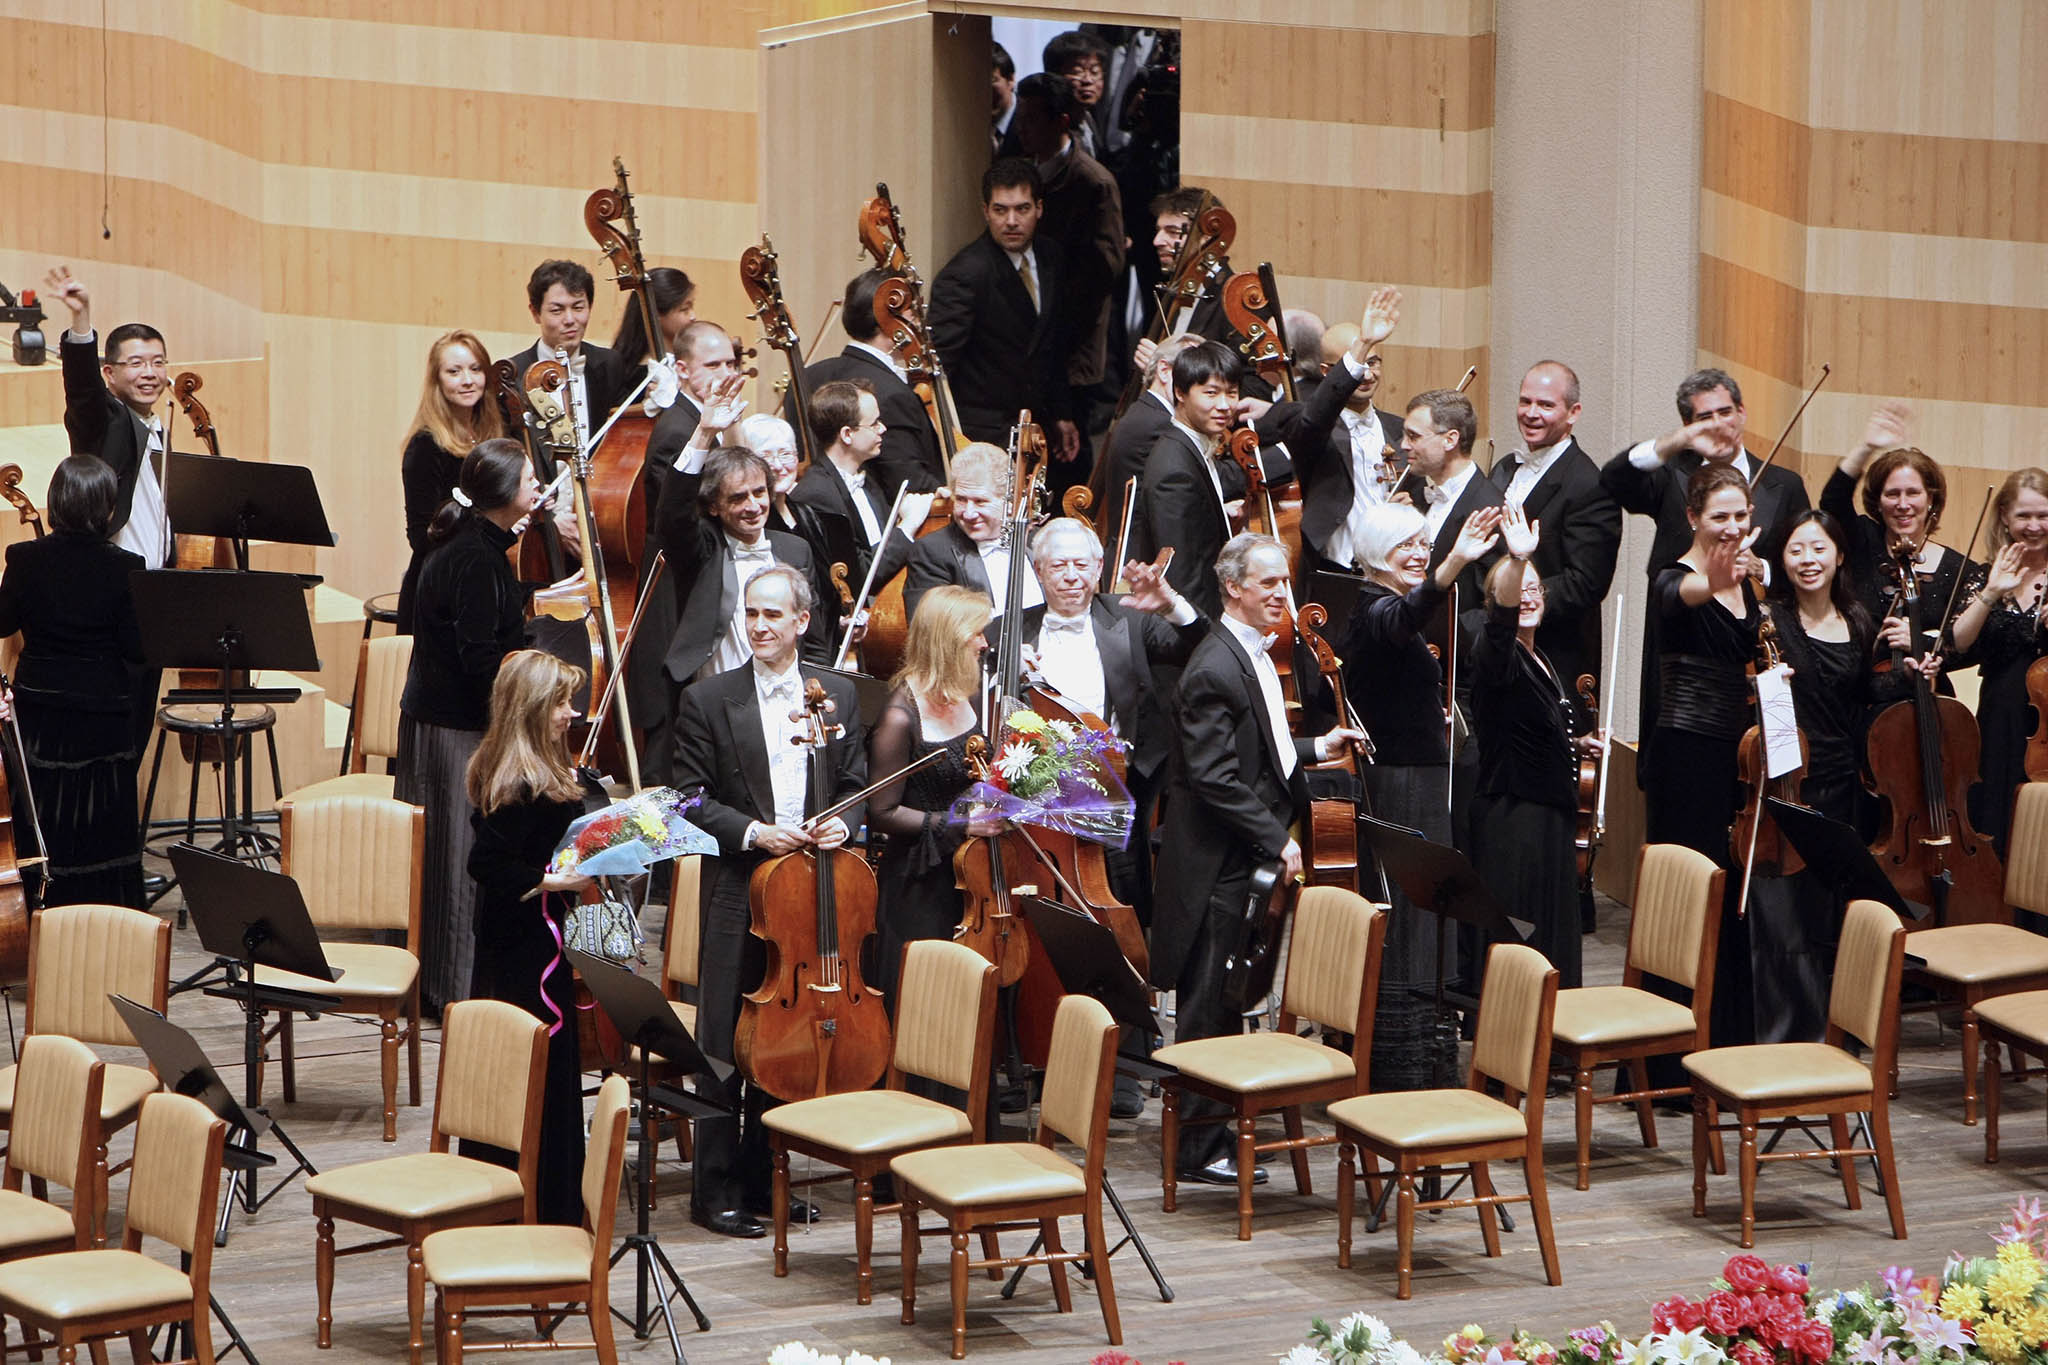 Members of the New York Philharmonic waved to the audience as they left the stage following their historic concert in Pyongyang on Feb. 26, 2008. (Chang W. Lee/The New York Times)